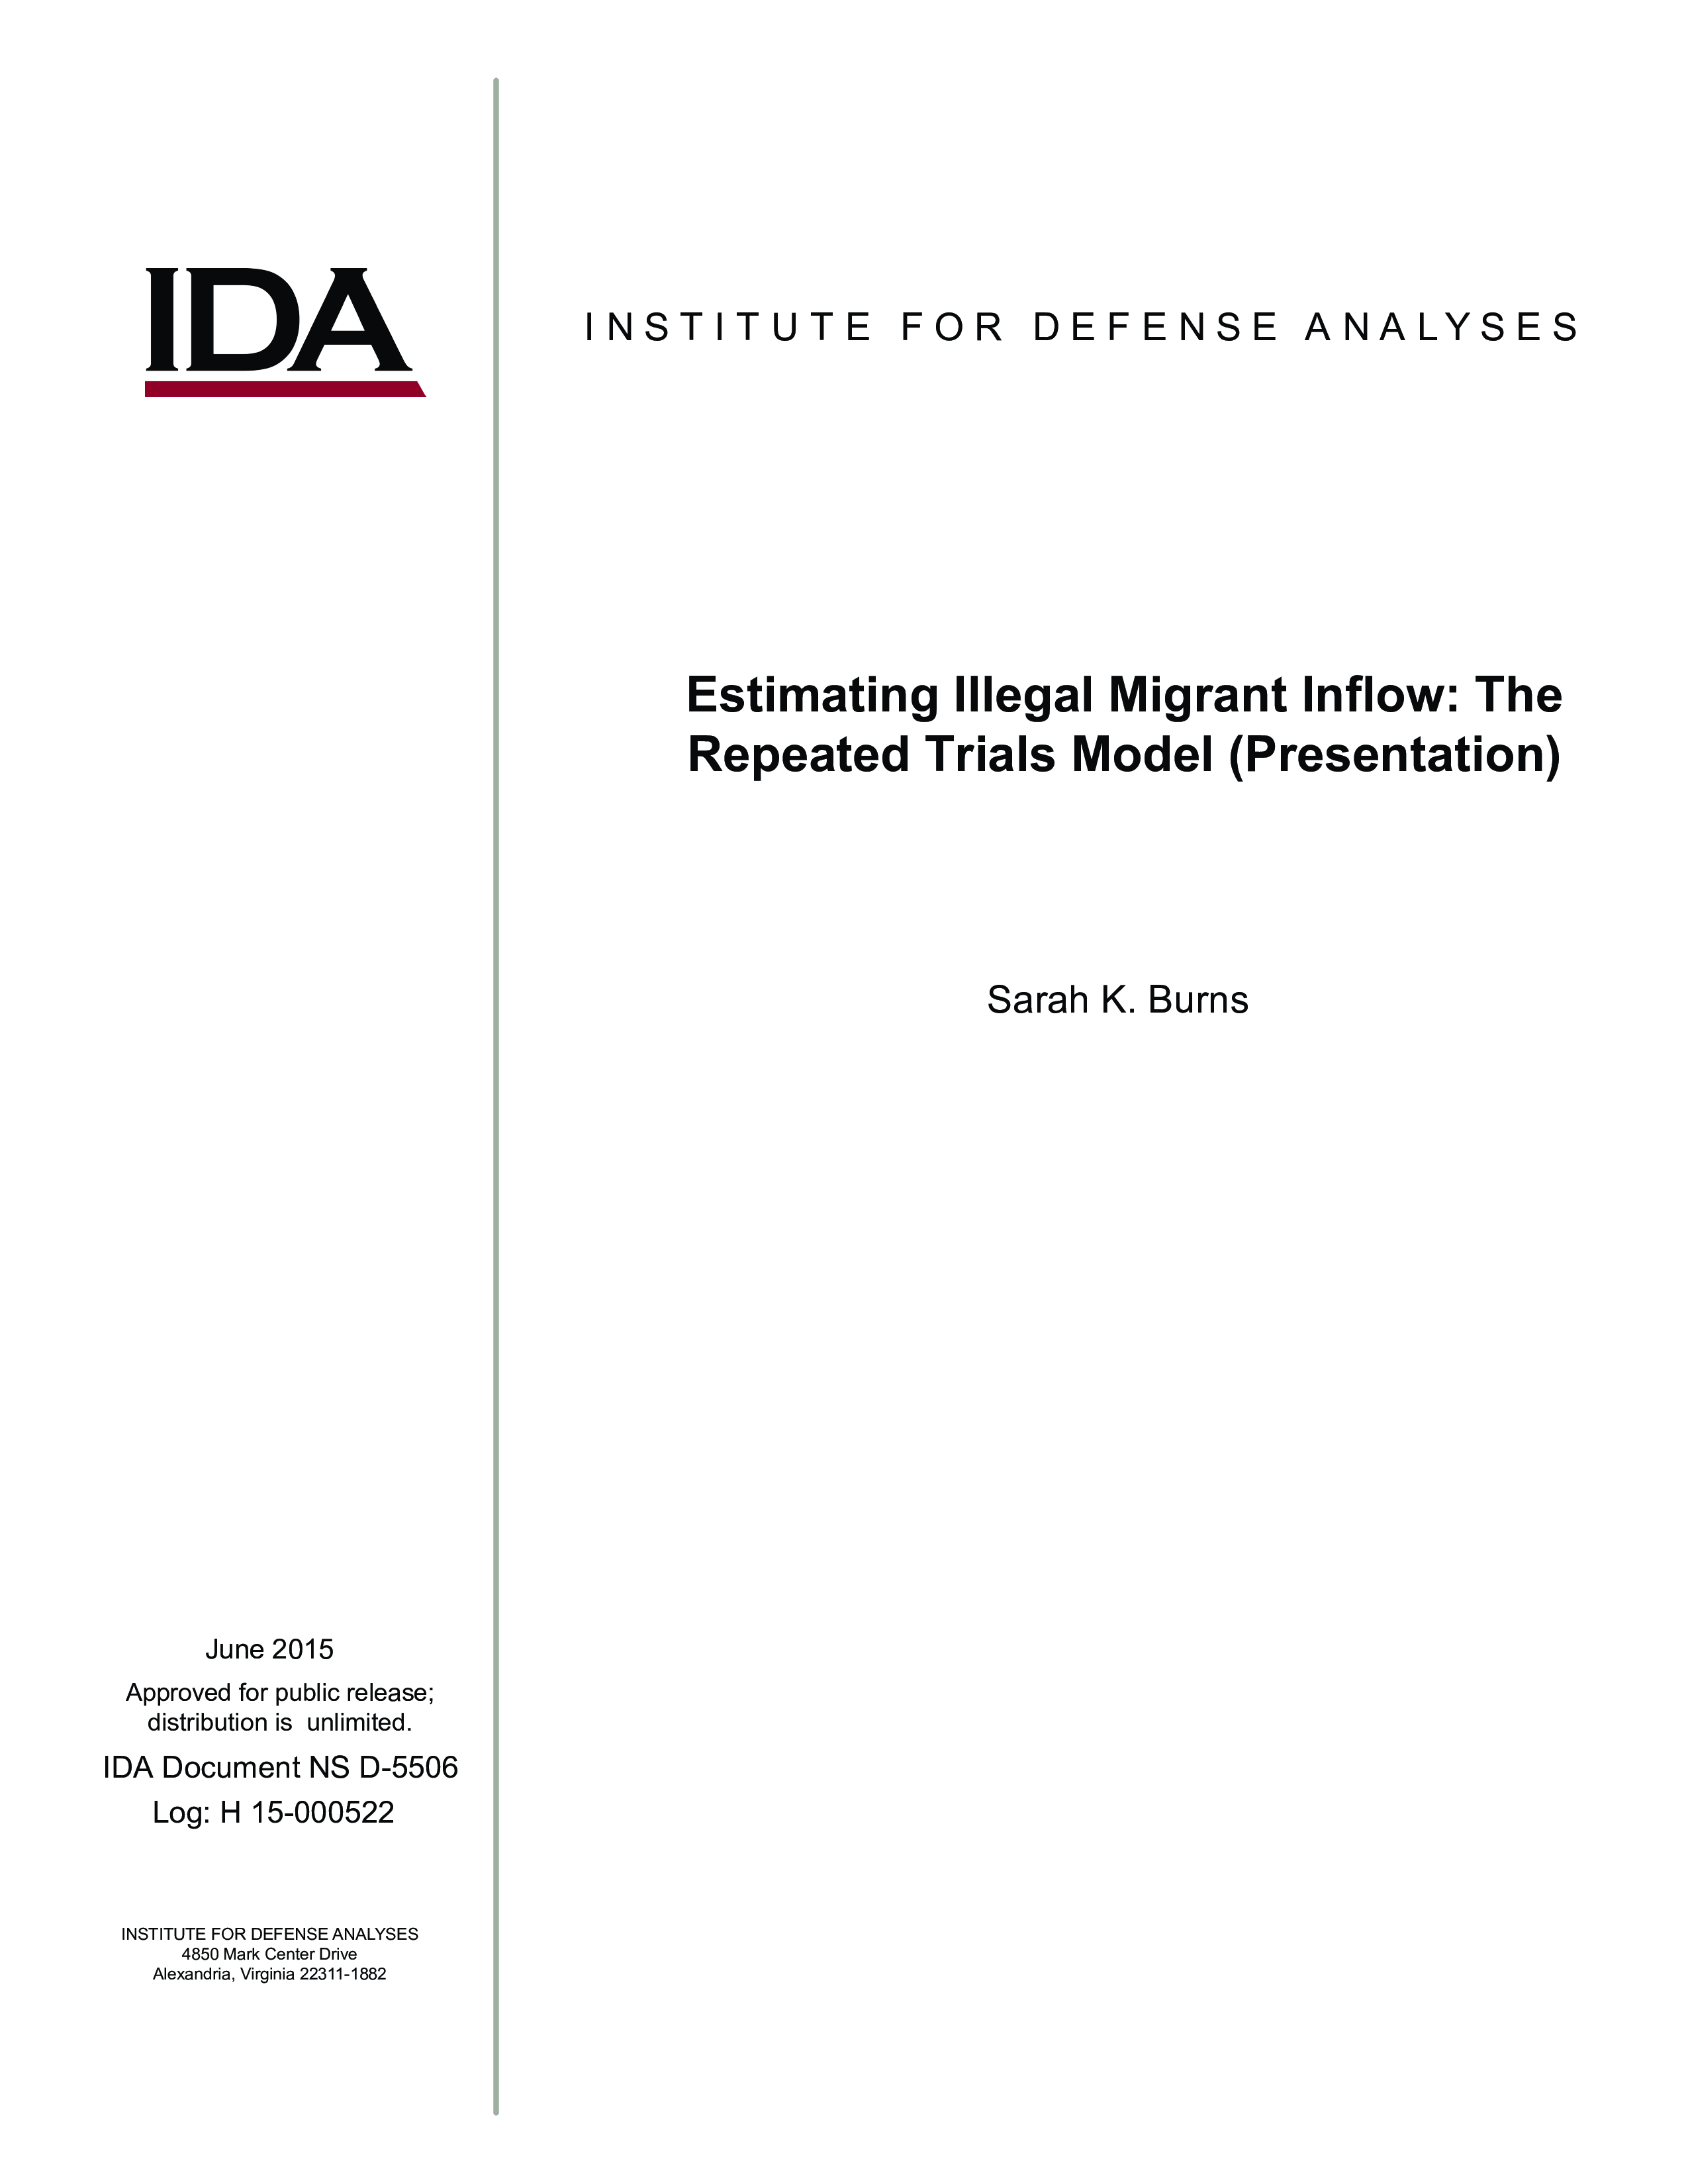 Estimating Illegal Migrant Inflow: The Repeated Trials Model (Presentation)